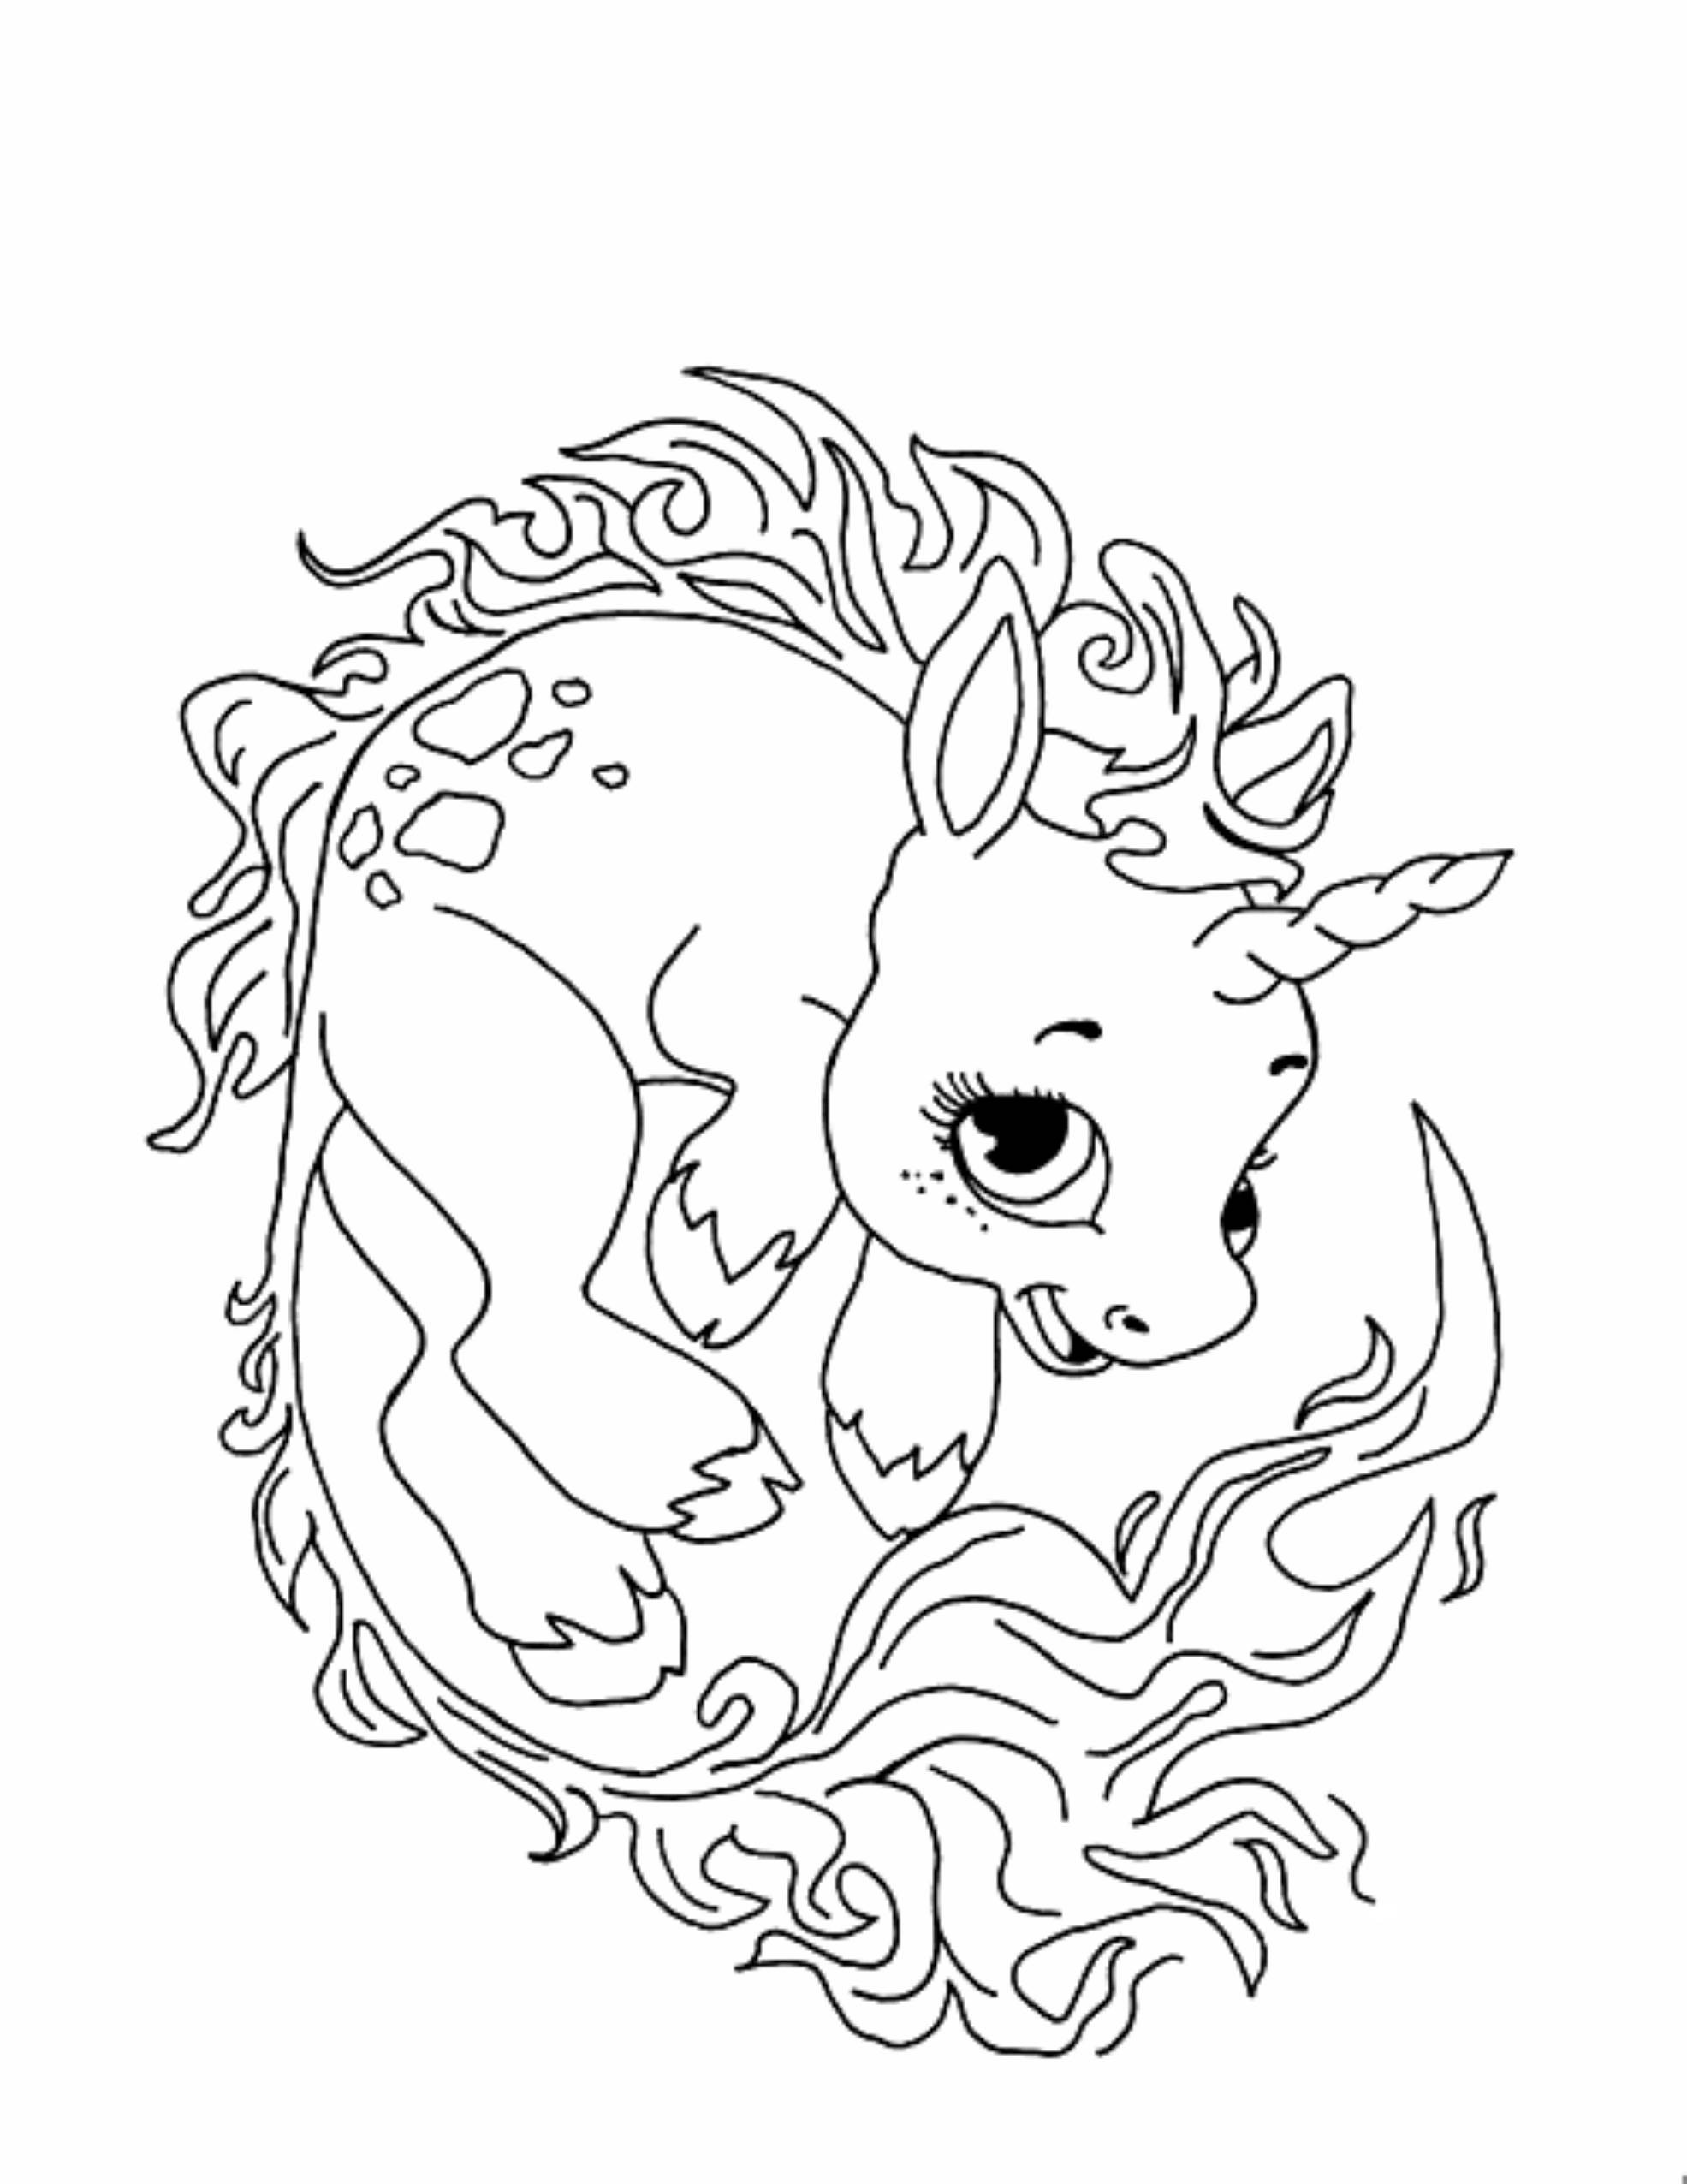 Cute Coloring Pages For Adults
 Cute Coloring Pages to Print Download